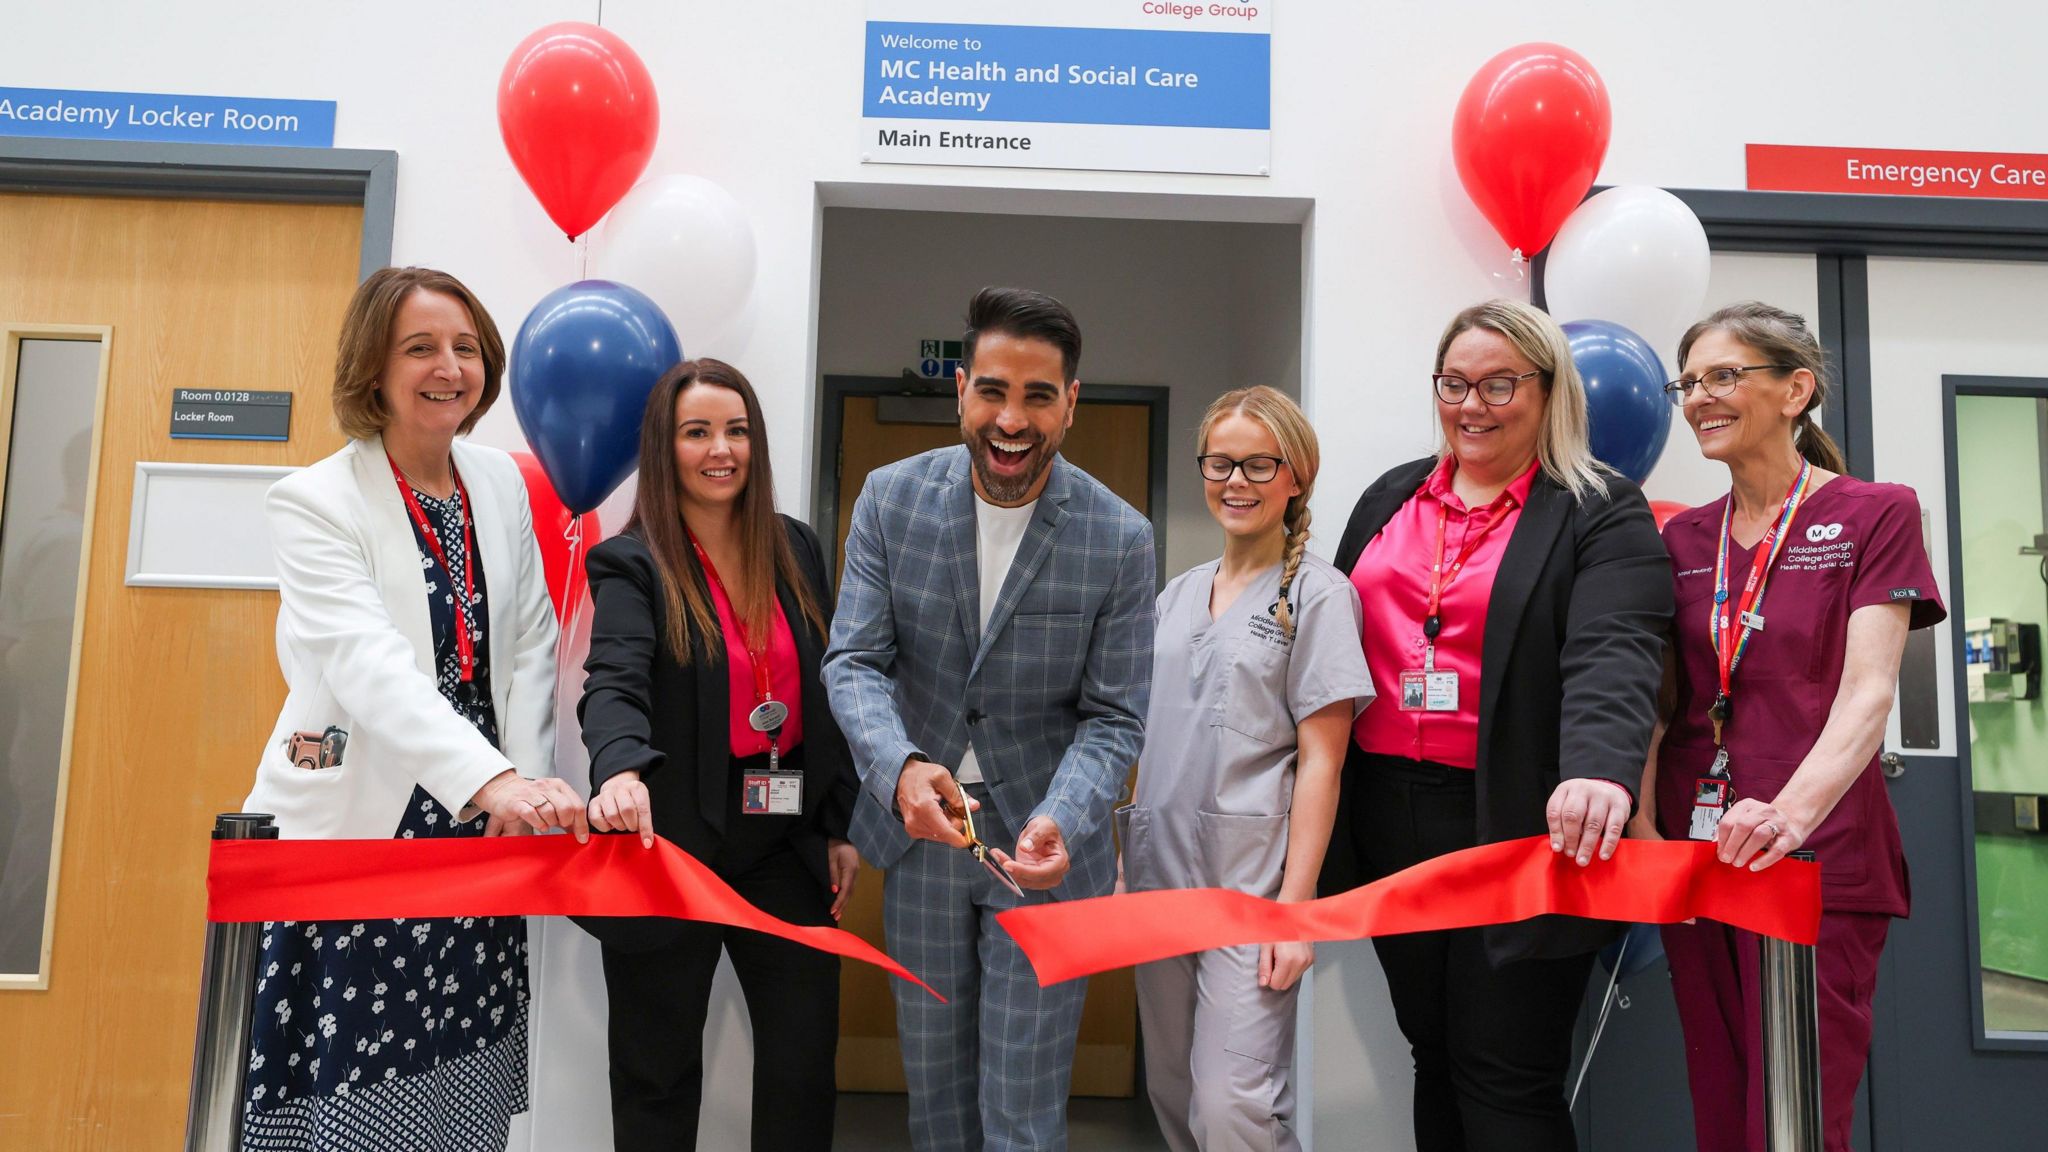 Celebrity TV doctor Ranj Singh cutting the ribbon surrounded by staff and students at Middlesbrough College